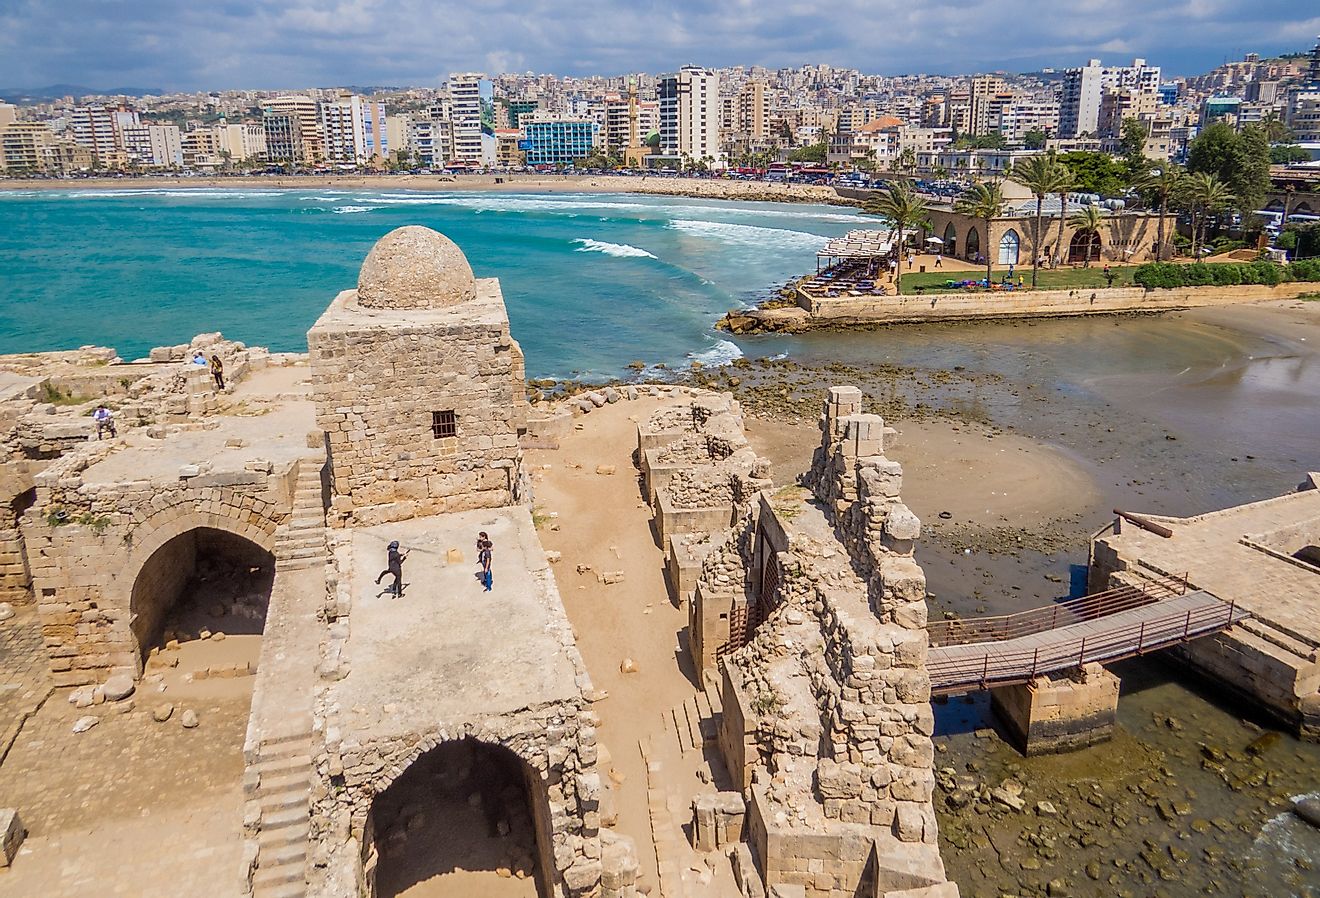 Sidon Sea Castle, built by the Crusaders as a fortress of the holy land, Sidon, Lebanon. Image credit Diego Fiore via Shutterstock